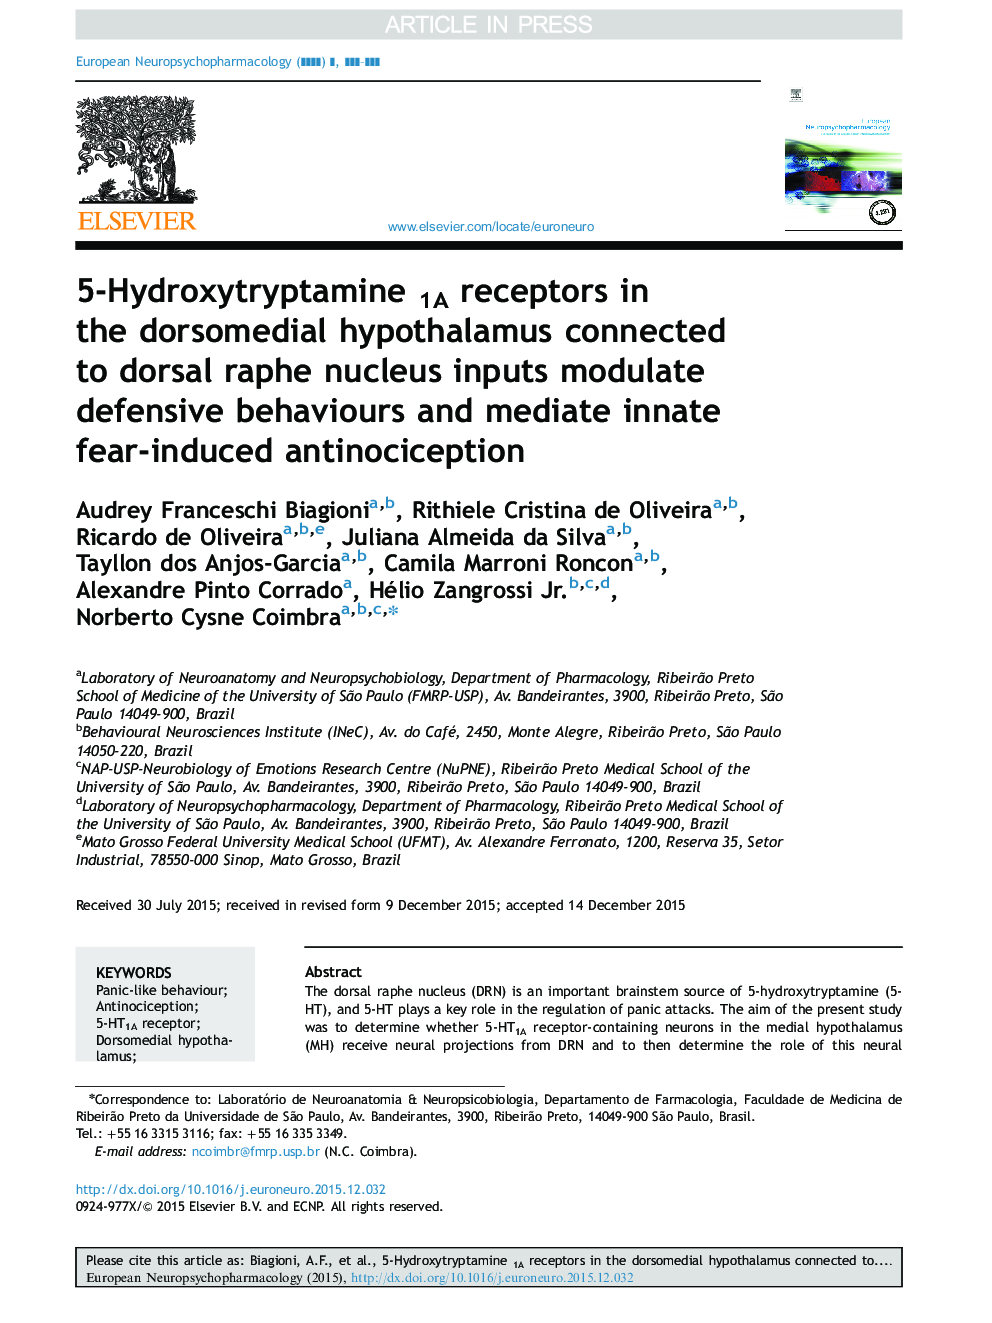 5-Hydroxytryptamine 1A receptors in the dorsomedial hypothalamus connected to dorsal raphe nucleus inputs modulate defensive behaviours and mediate innate fear-induced antinociception